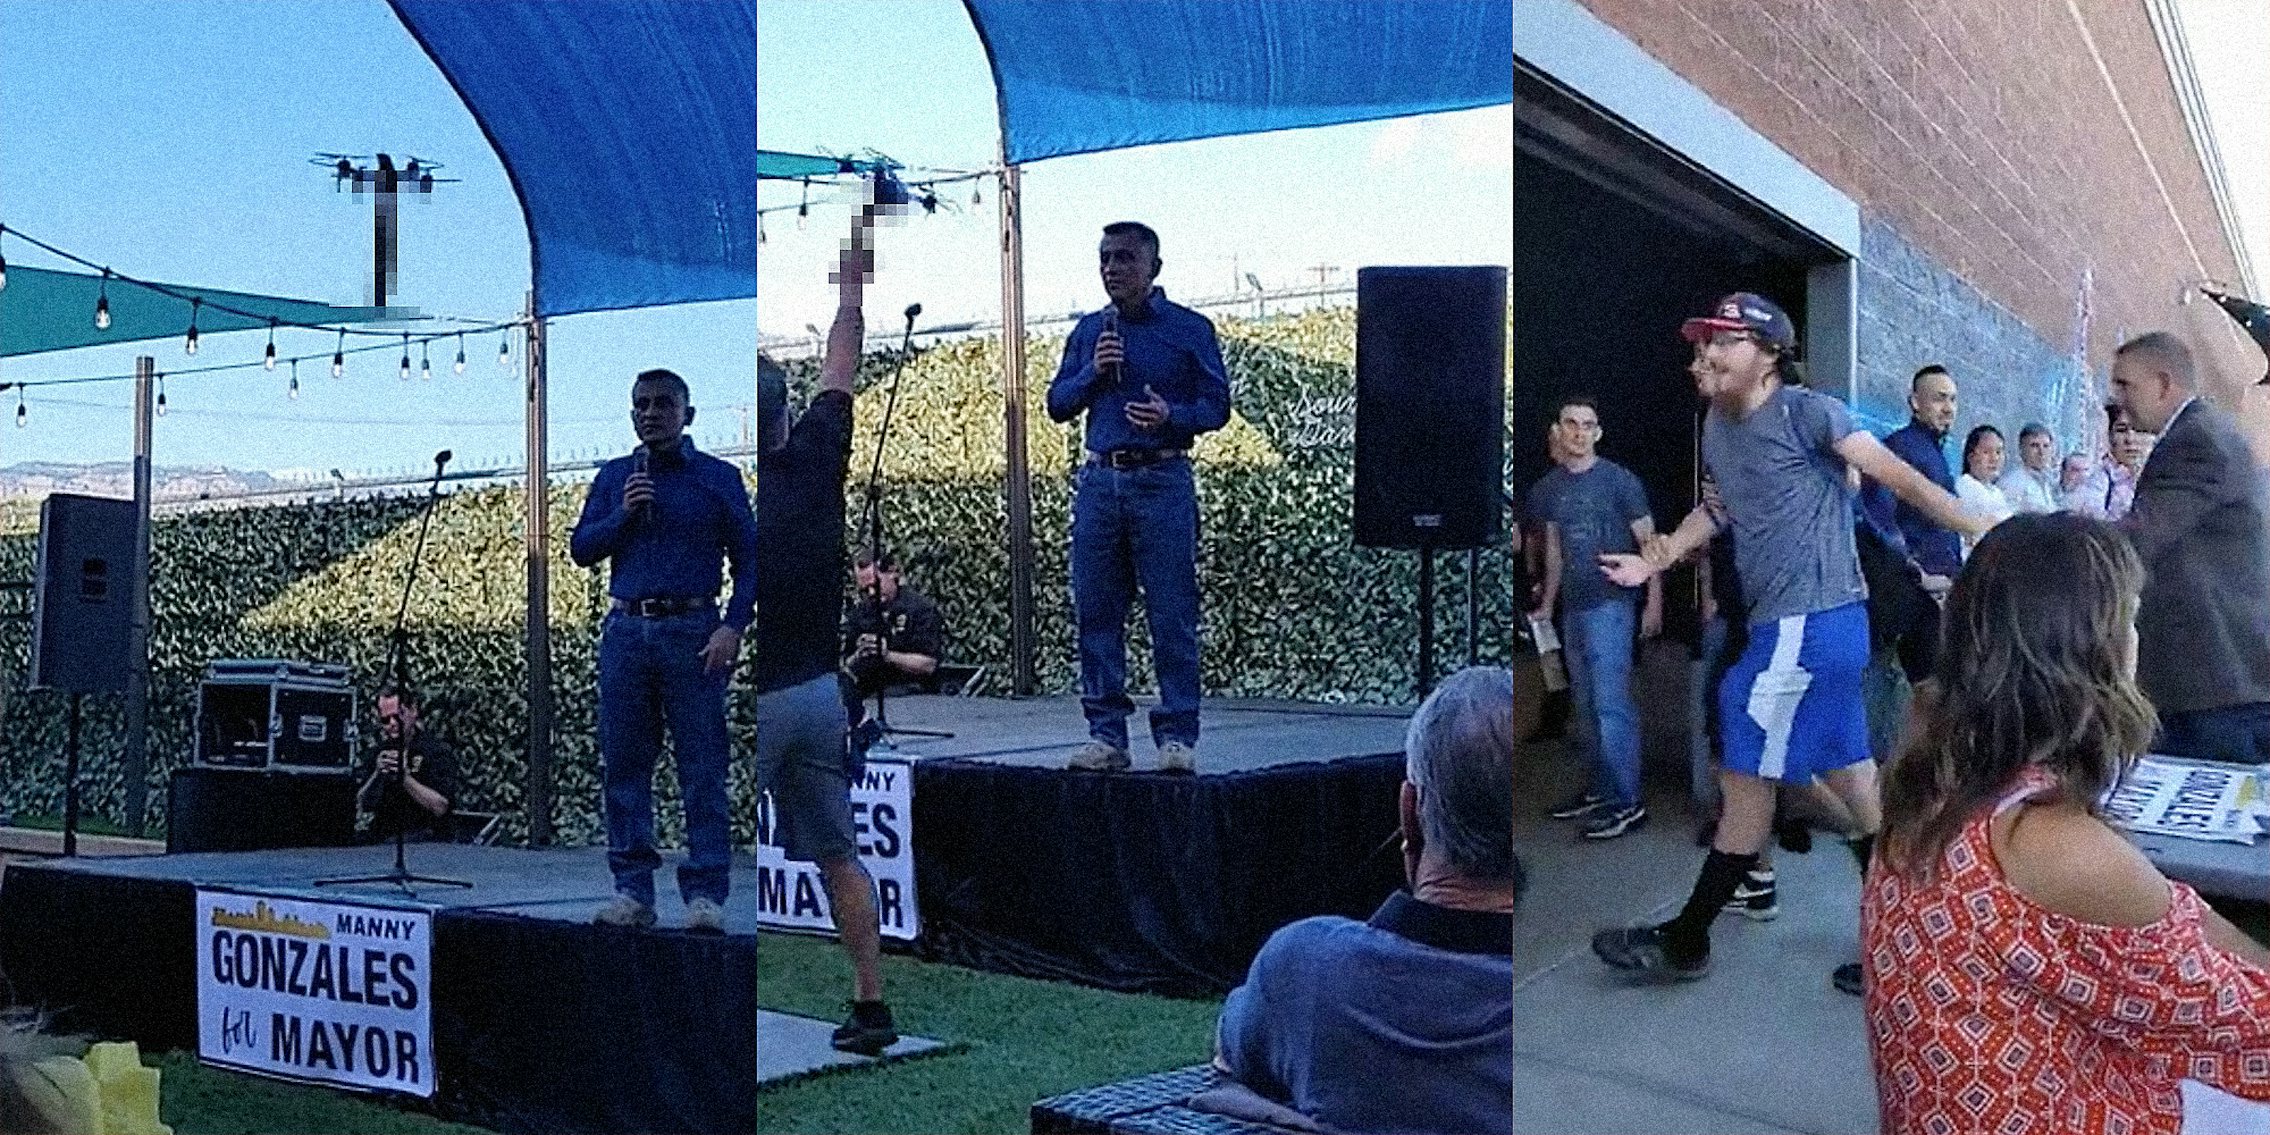 A man on stage (L), a man grabbing a drone (C), and a man being taken away (R).